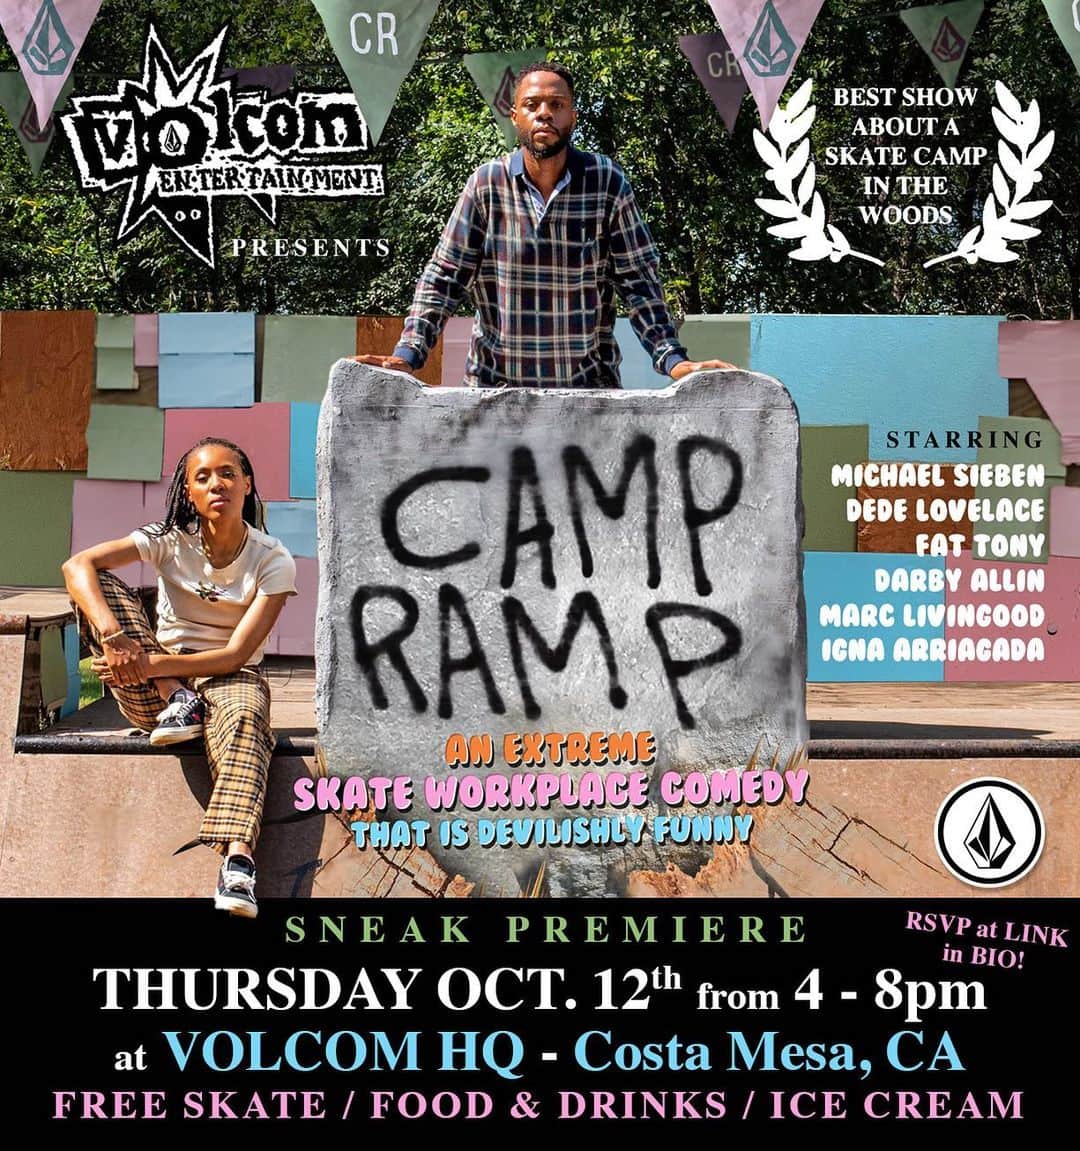 Volcom Women'sのインスタグラム：「CAMP RAMP⛺️ Sneak Premiere THIS THURSDAY at @volcom HQ with @dedelovelace + @fattonyrap ! Come use the photobooth, skate, get some product chain stitched, and some drinks/food before we watch Camp Ramp 🤘 All ages! We are coming to Austin this Friday the 13th and New York on the 19th! Check out our highlight for the RSVP! #campramp」